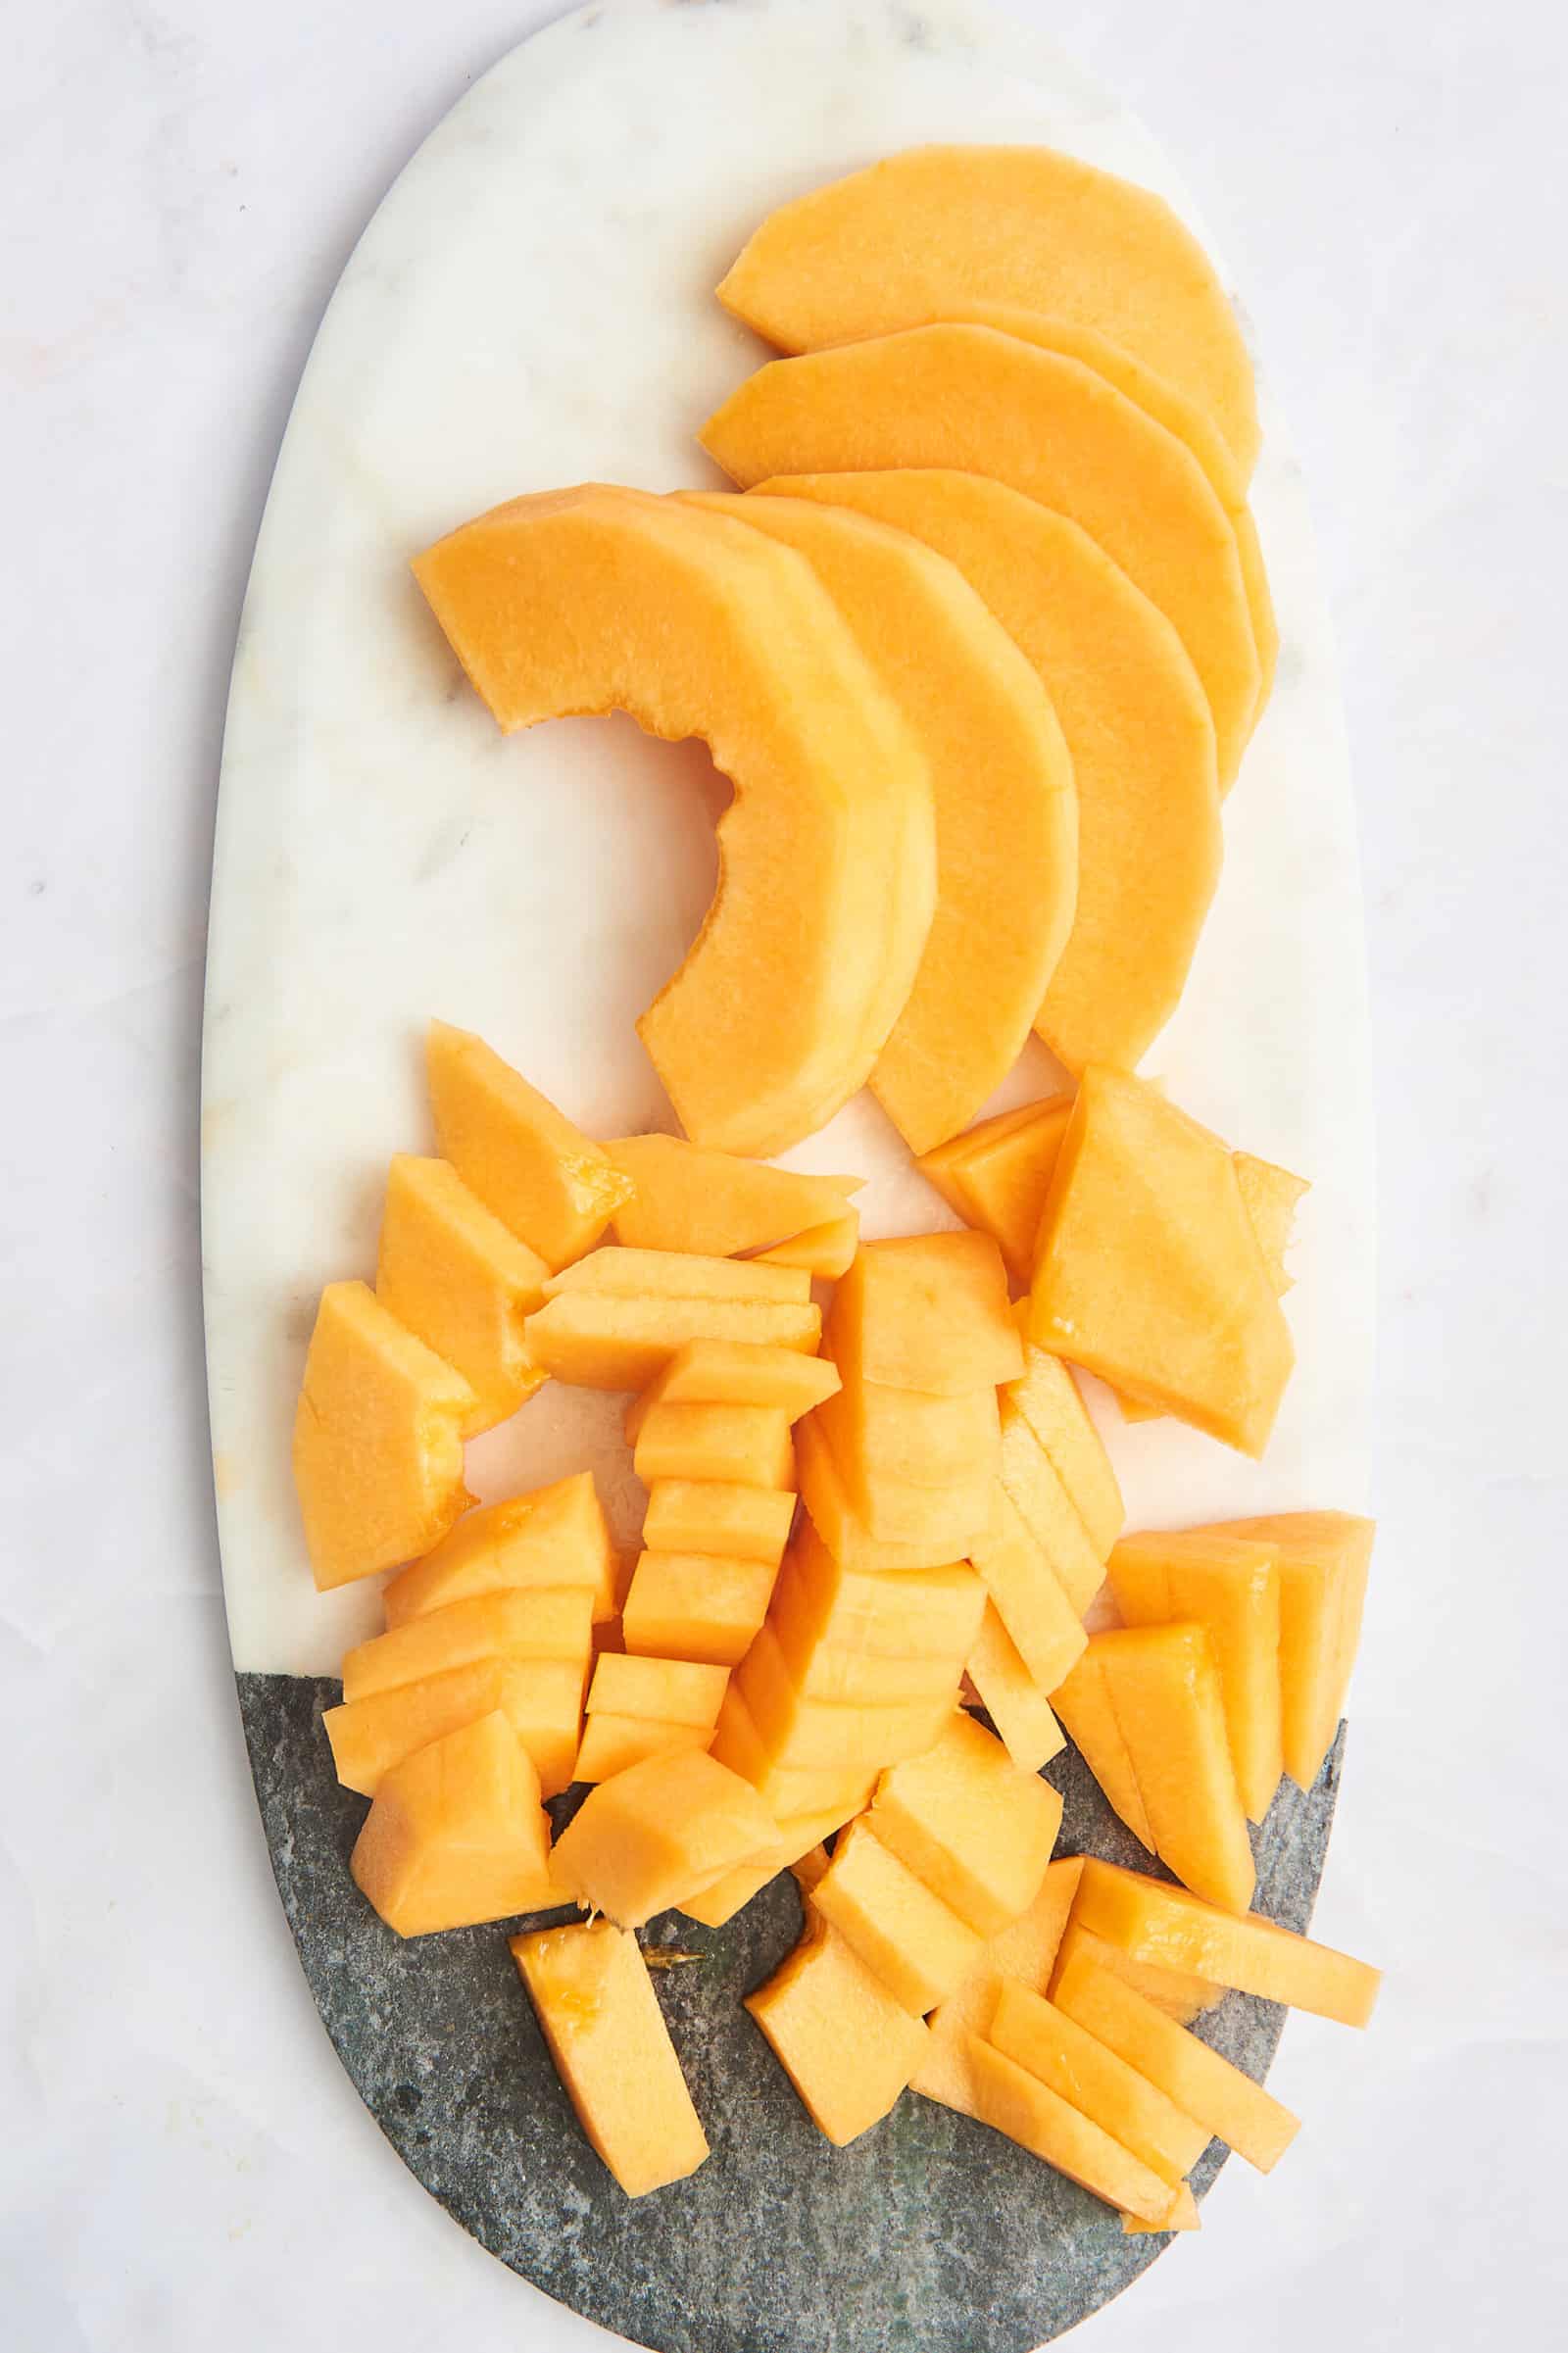 A platter of sliced cantaloupe slices and cubes.